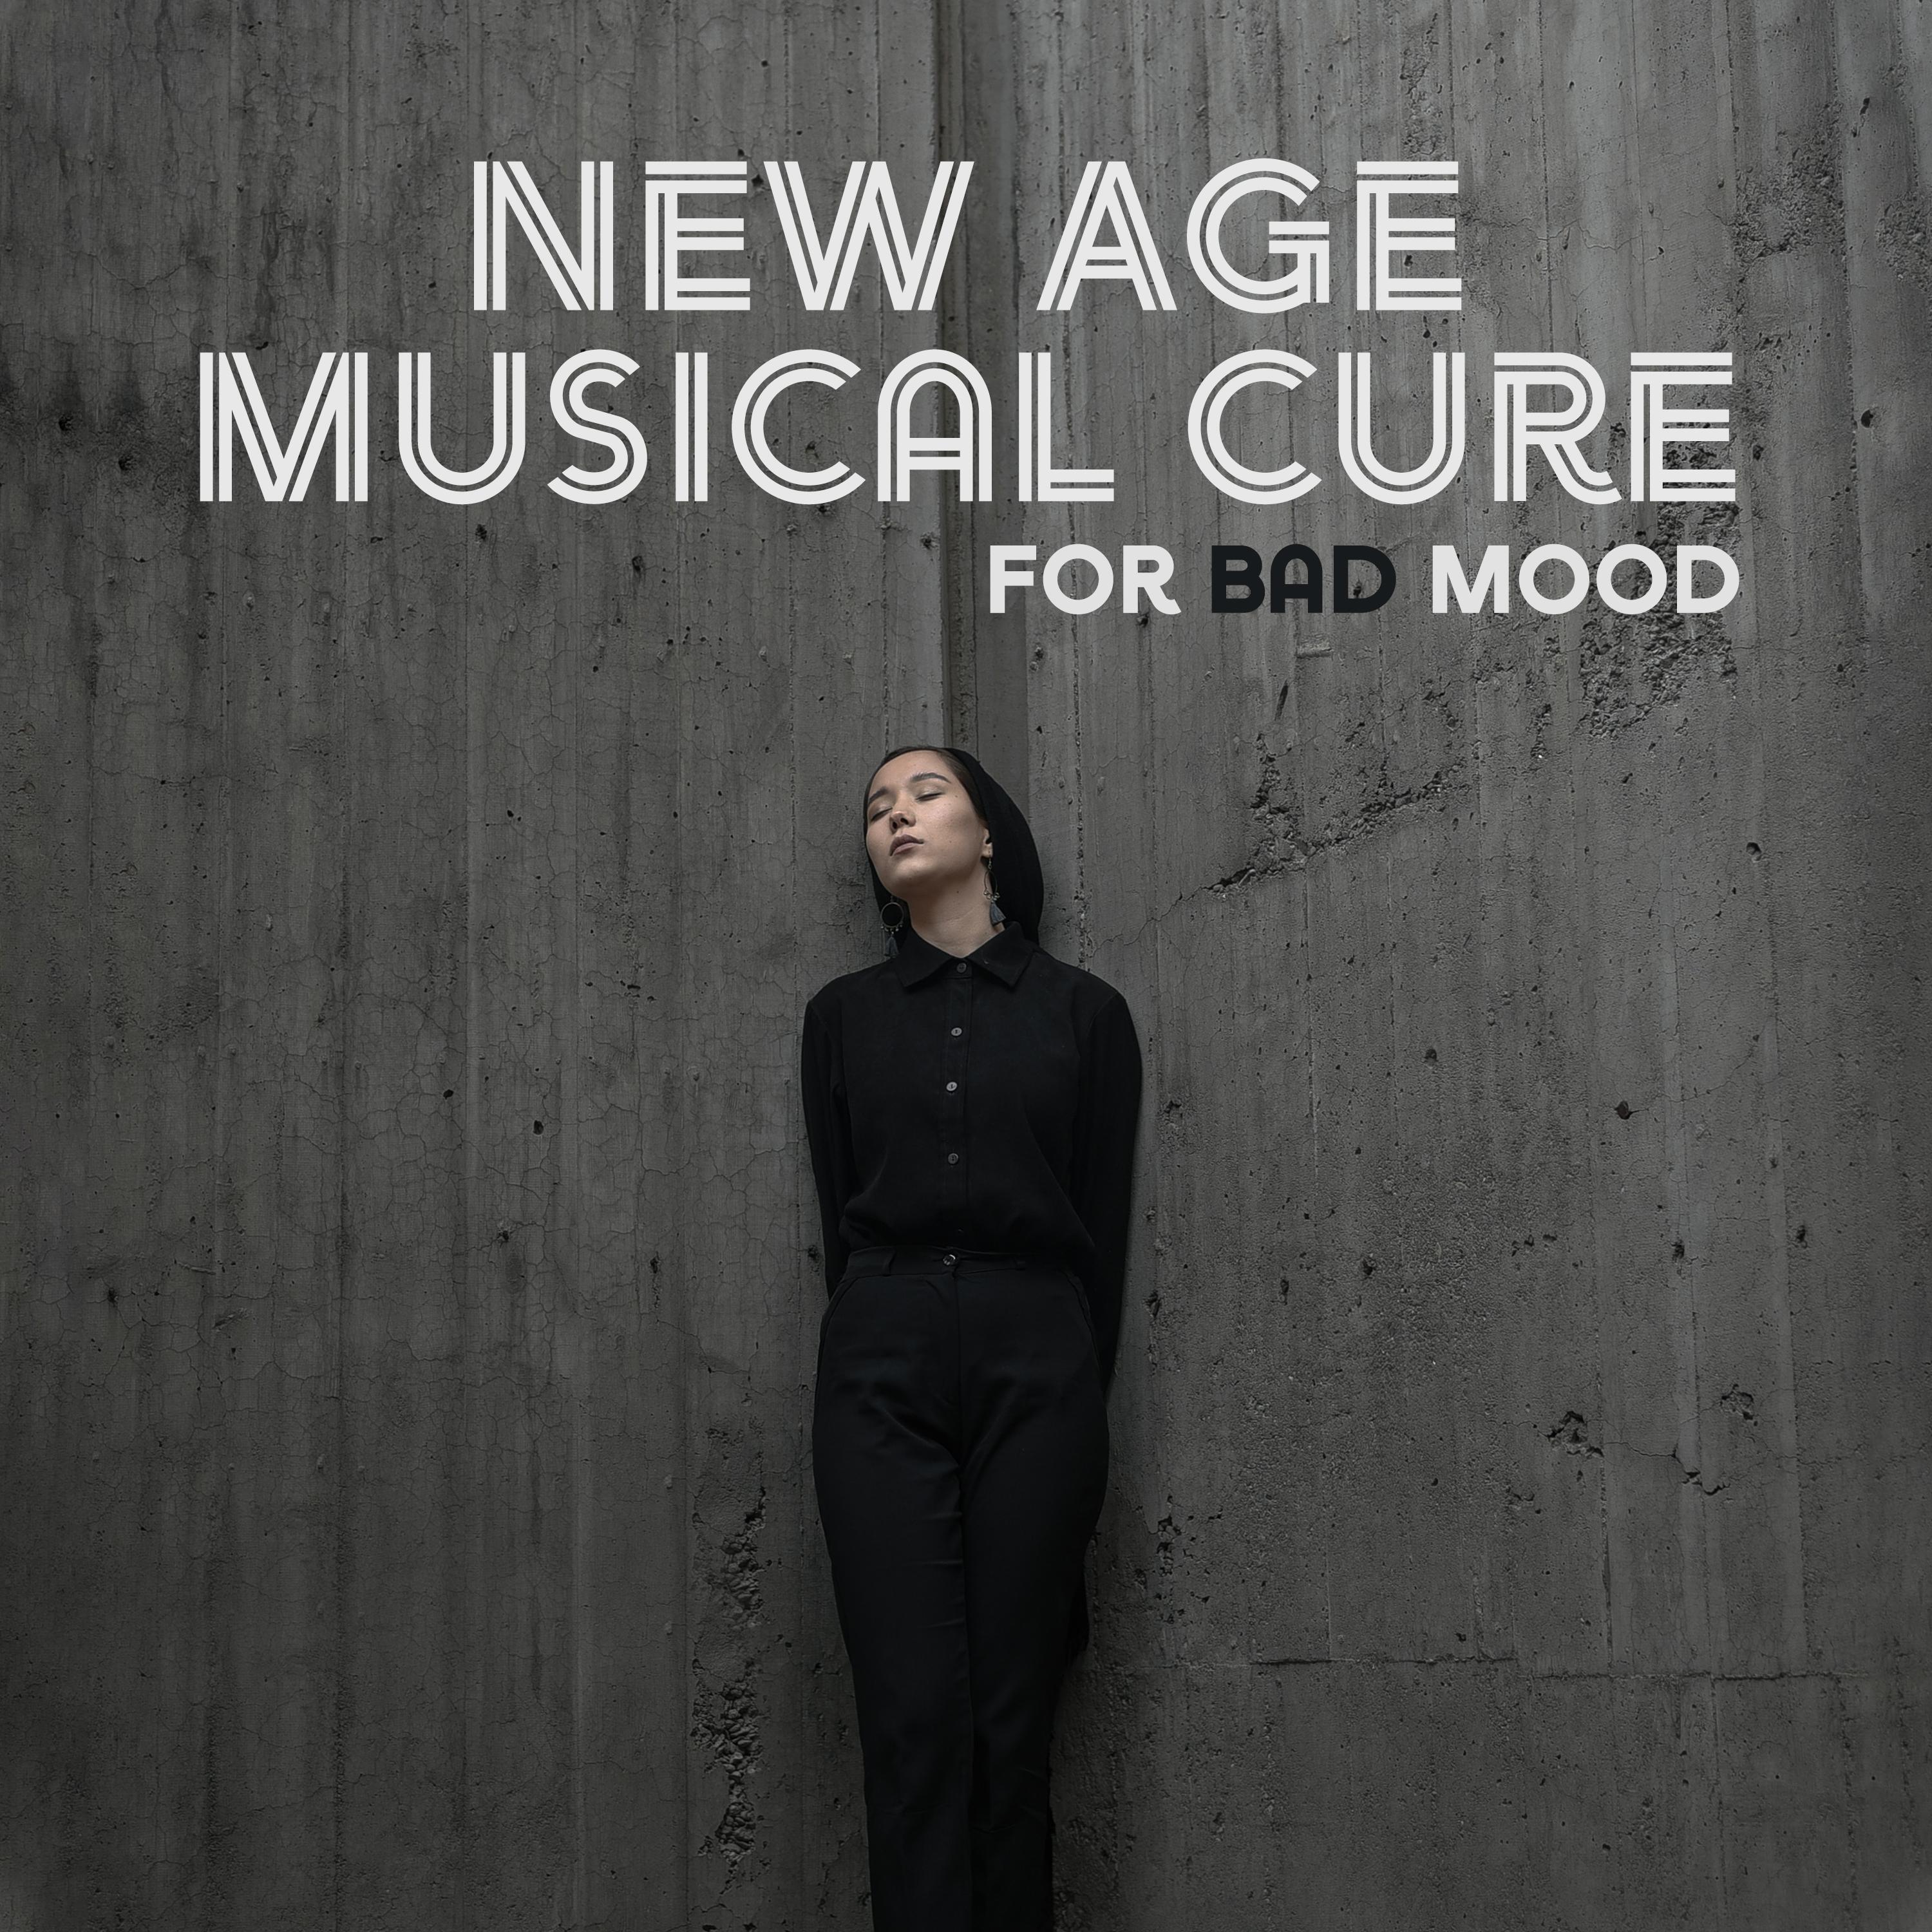 New Age Musical Cure for Bad Mood  2019 Compilation of Best Soothing Songs, Fight with Depression, Stress Relief, Calm Down, Improve Your Mood, Learn to Be Happy